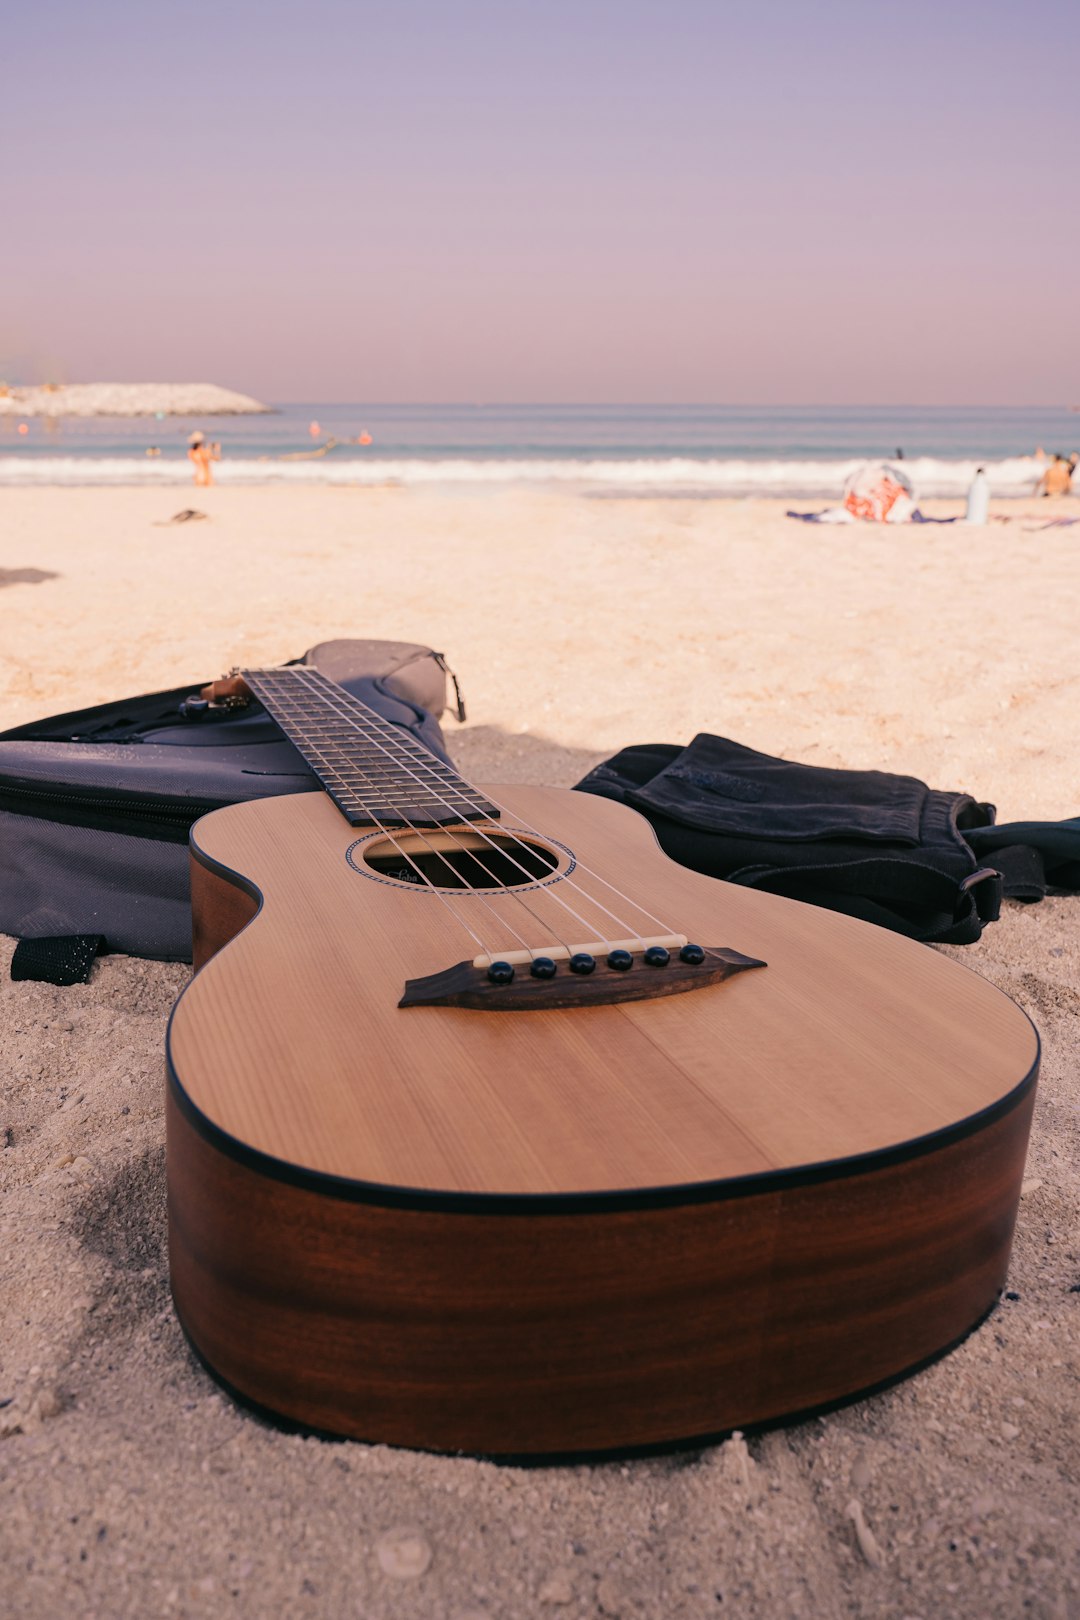 brown acoustic guitar on gray sand during daytime